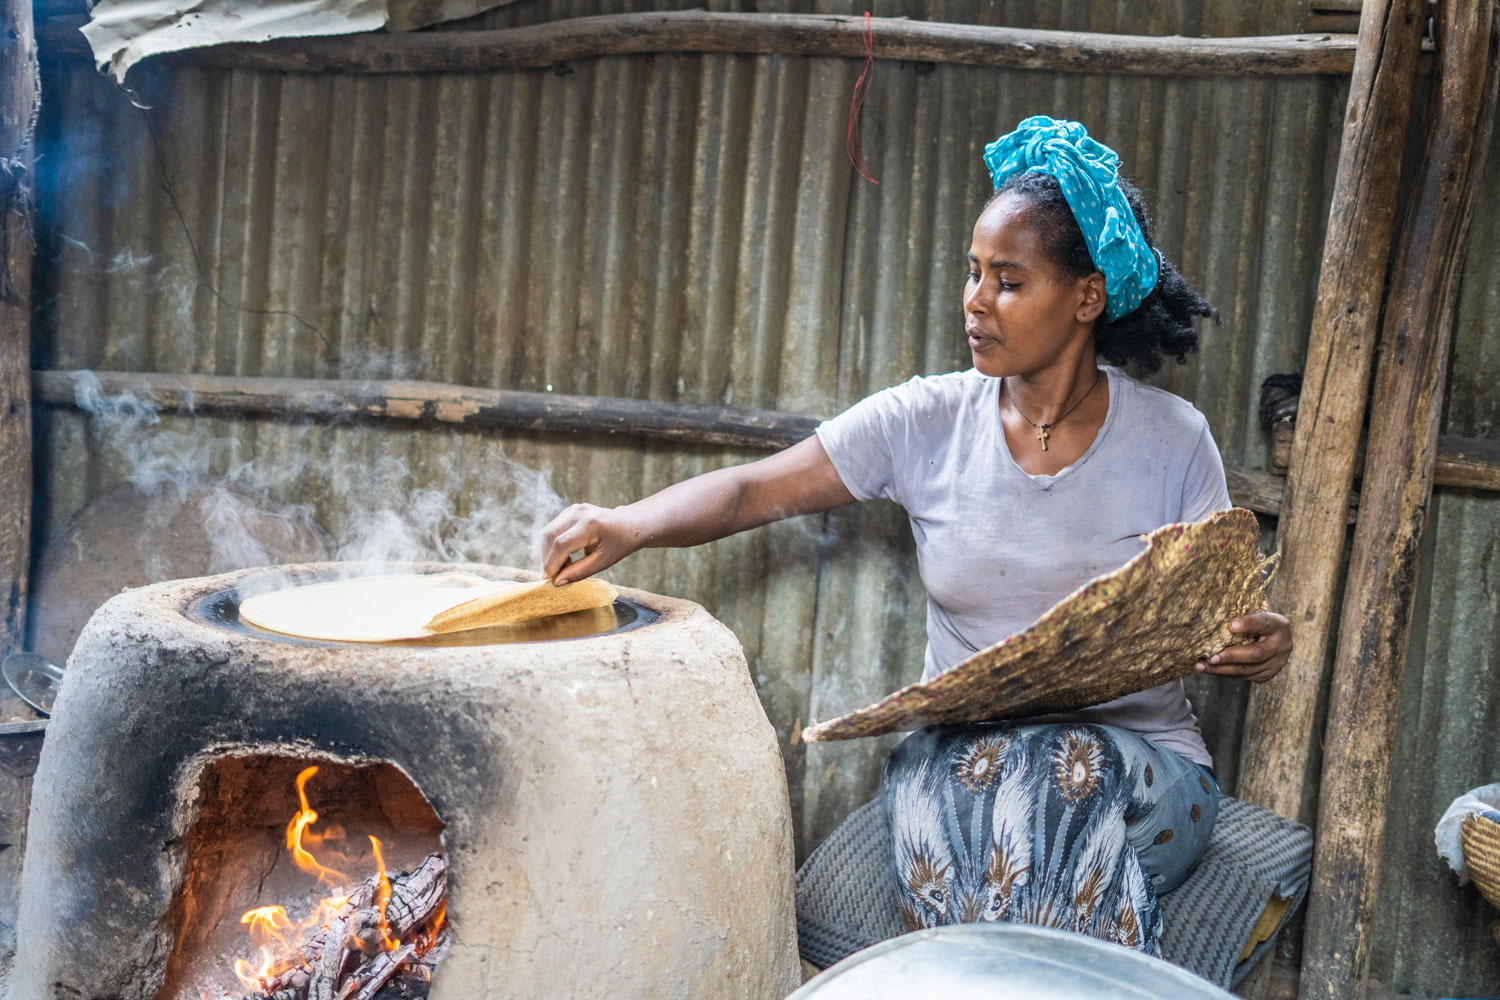 A woman slowly lifting the edges of Ethiopian flatbread.